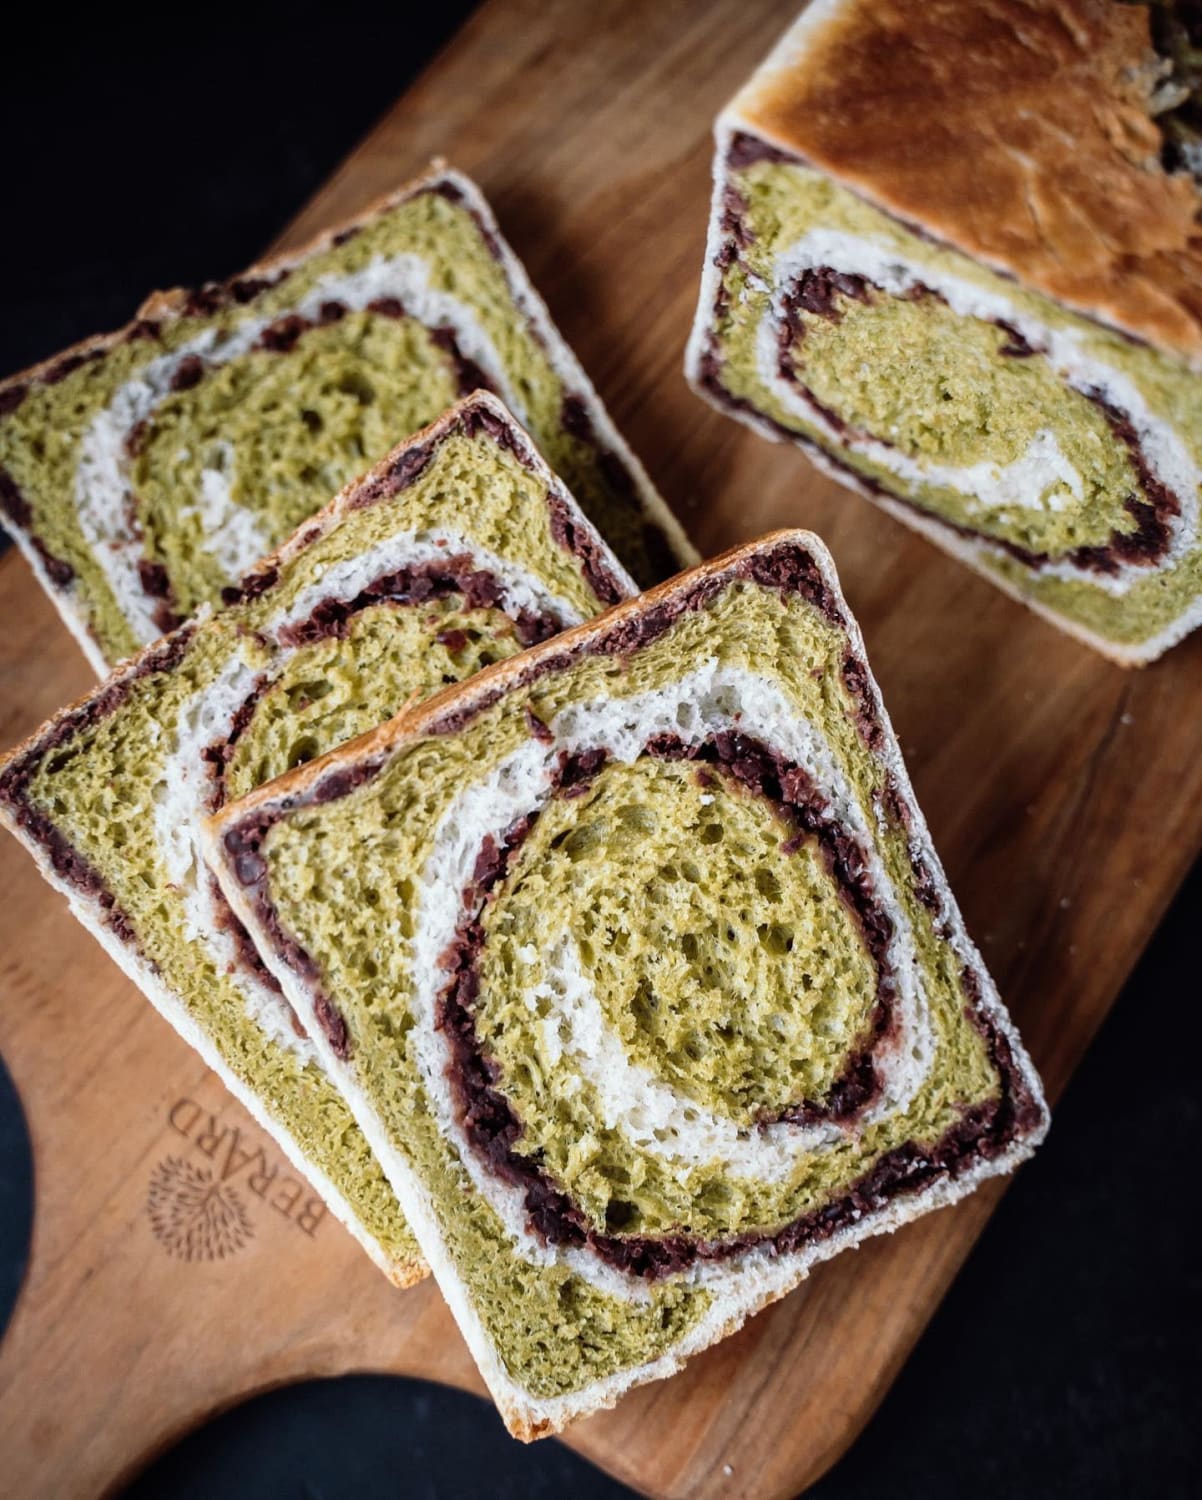 First attempt at a matcha anko swirl loaf. Lots of issues and not perfect yet but still pretty happy with how it turned out.